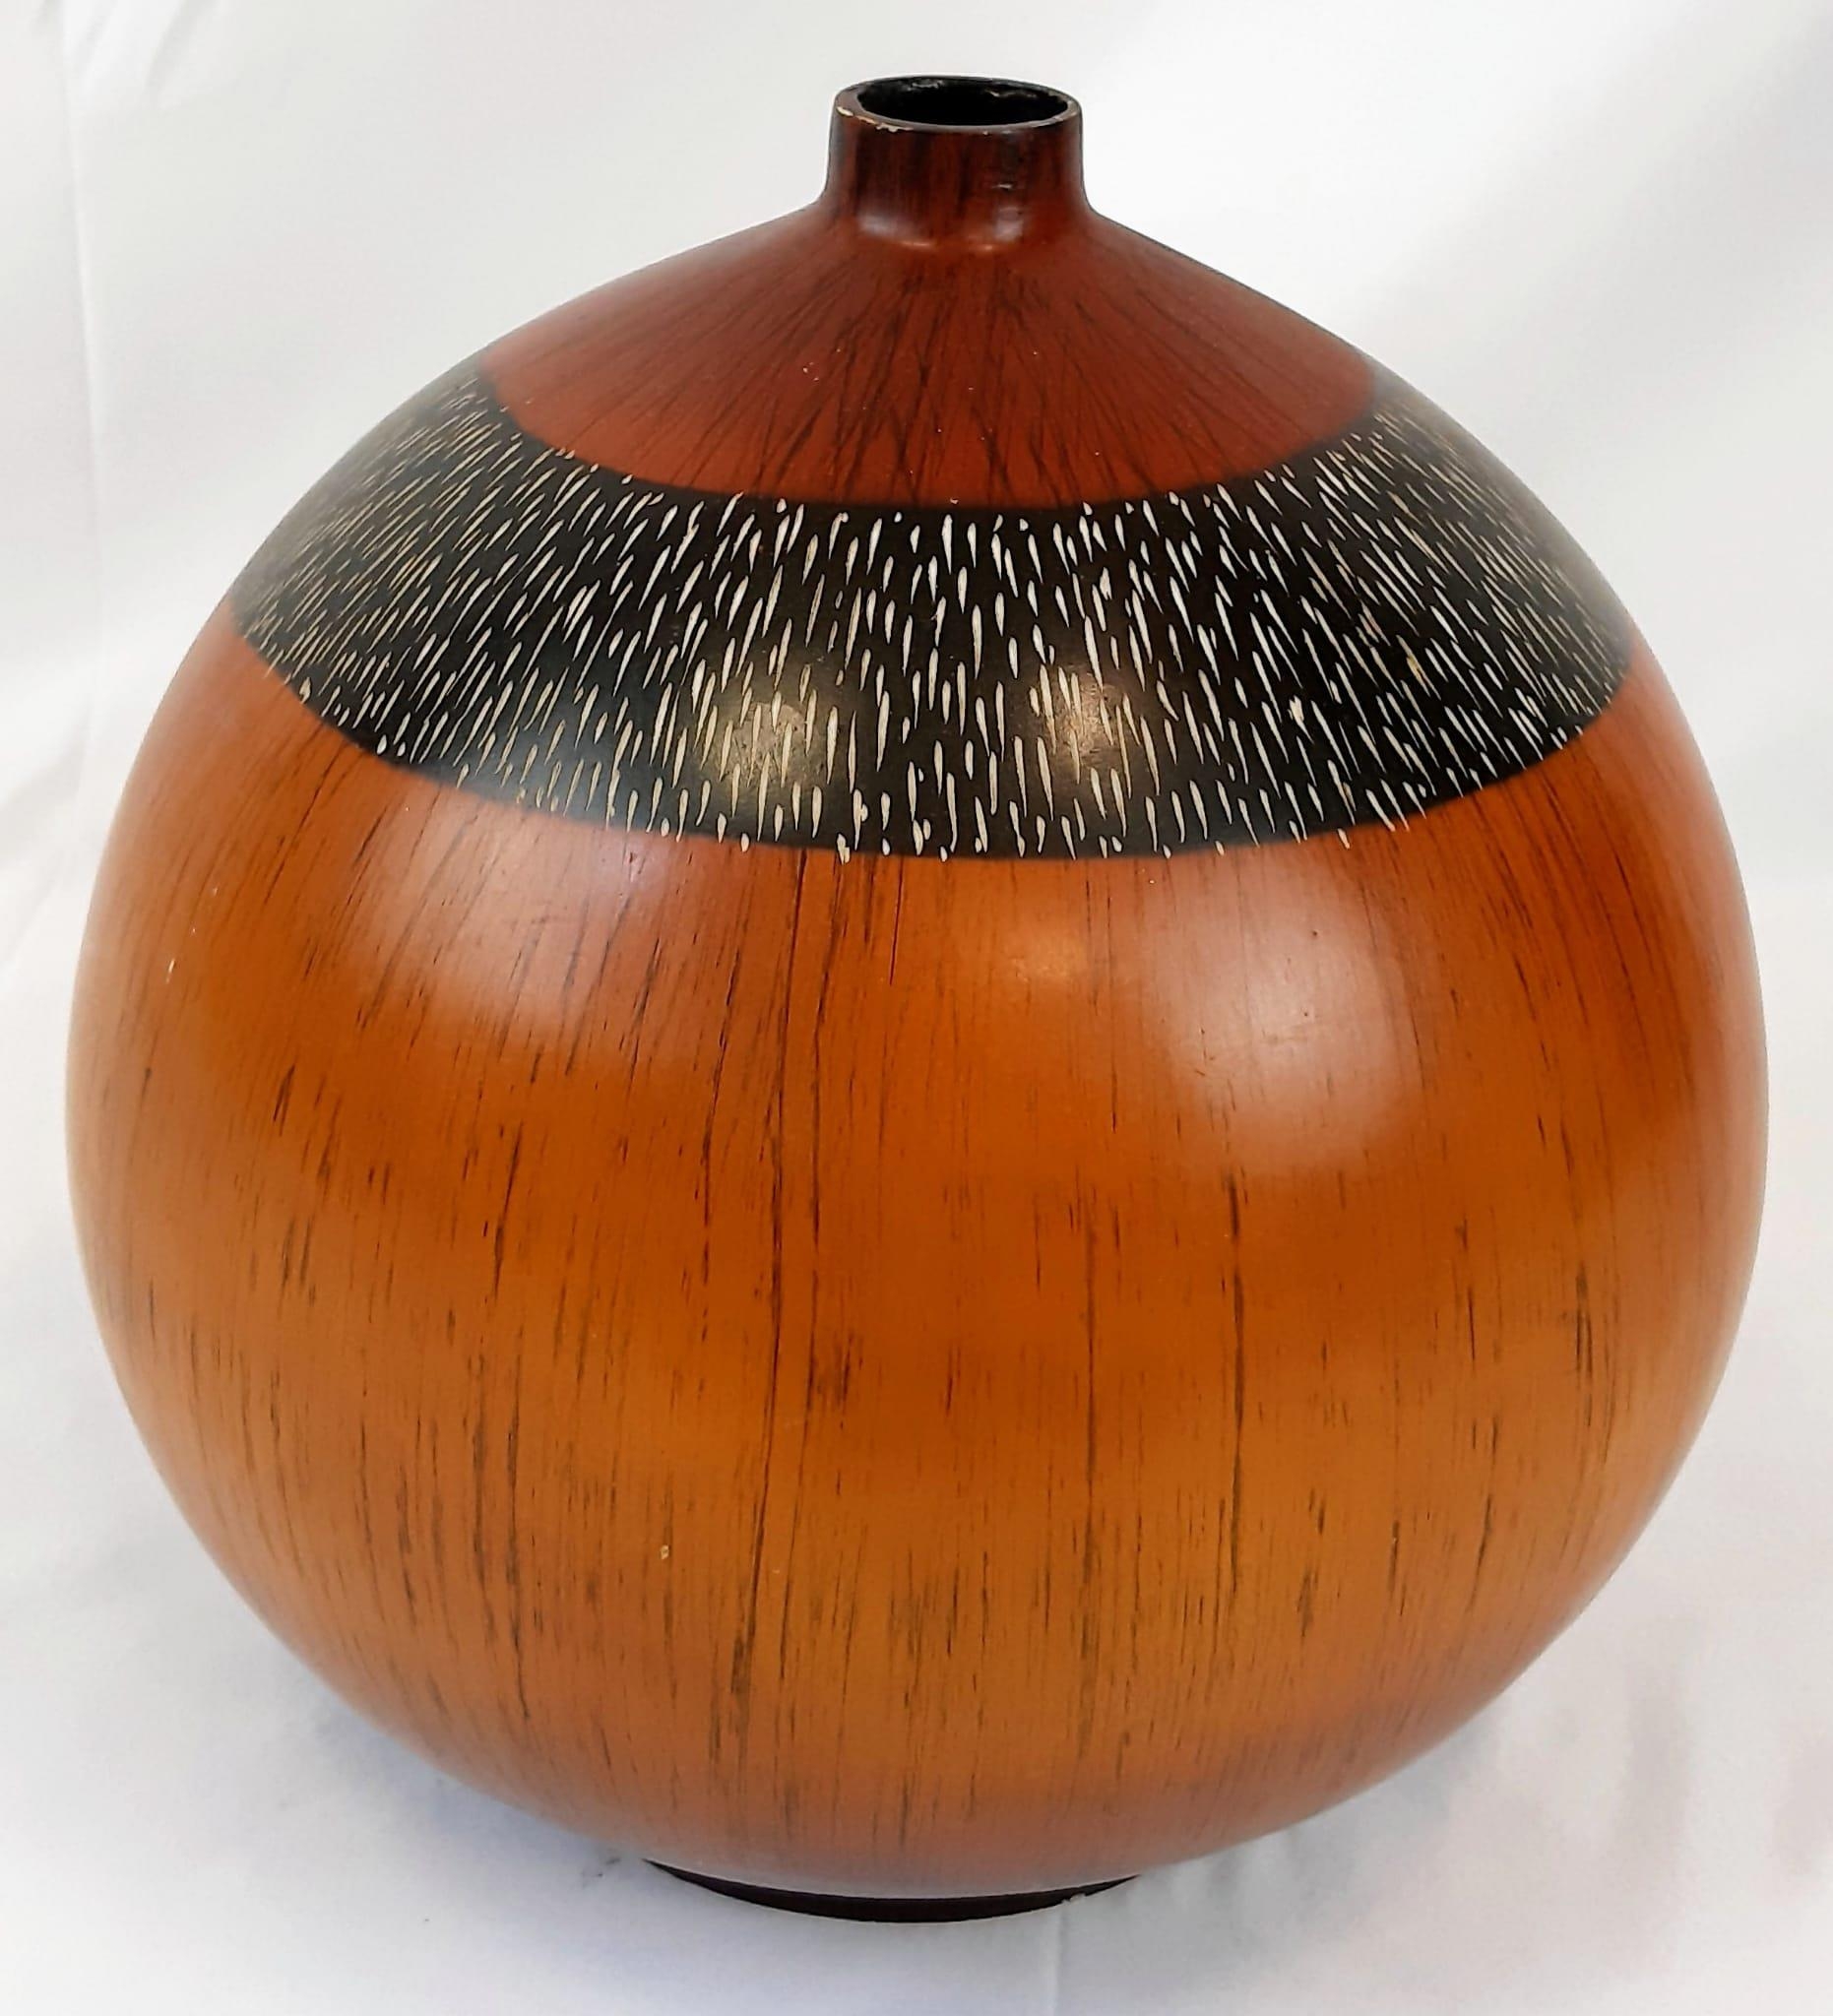 A Very Good Condition Vintage Large African Gourd Vase 30 cm diameter approx.